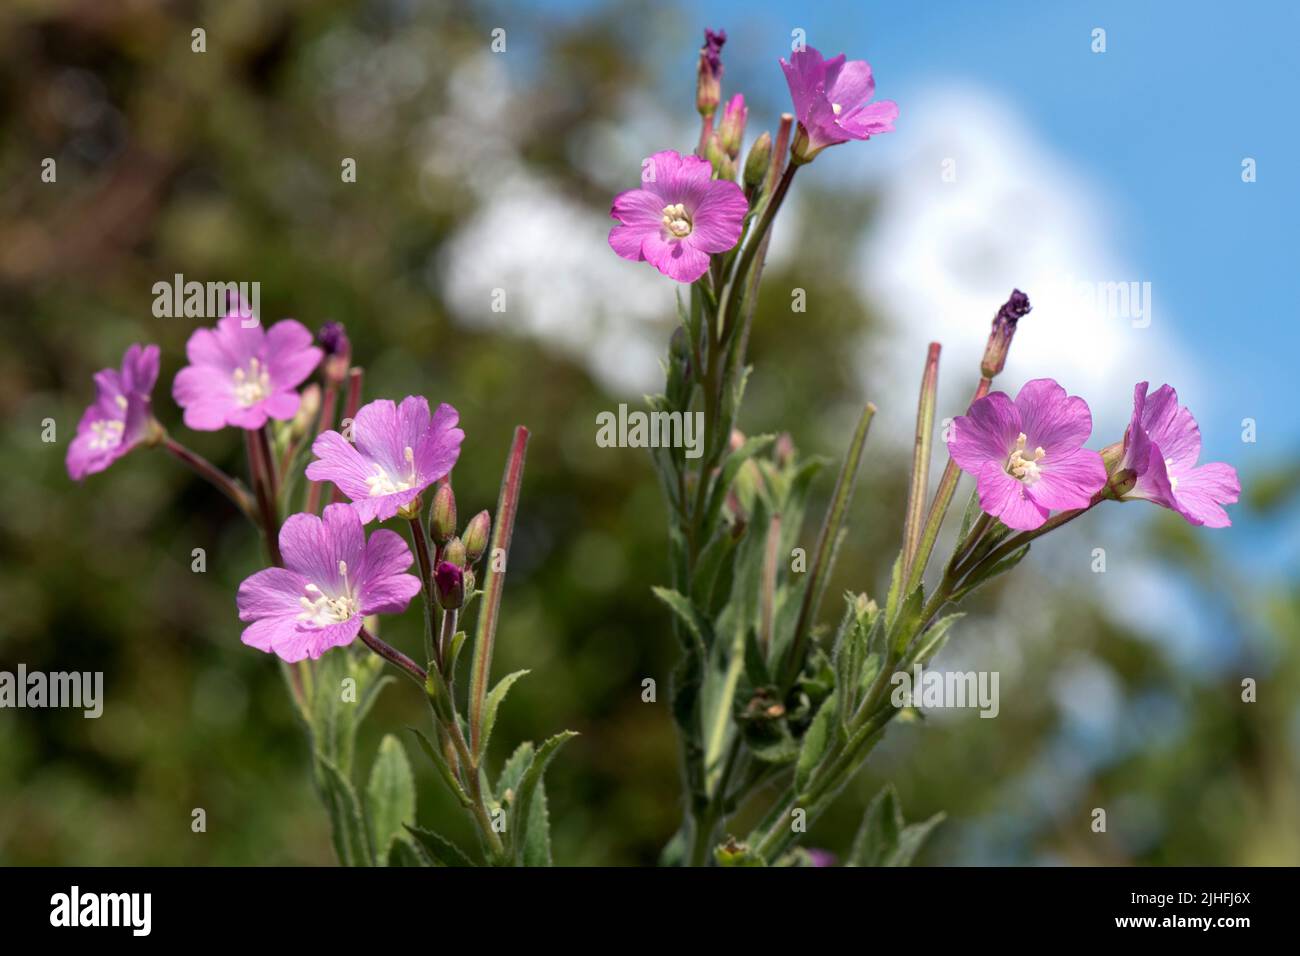 Pink flowers and early seedpods of greater willowherb or hairy willowherb (Epilobium hirsutum) on dry waste ground, Berkshire, July Stock Photo